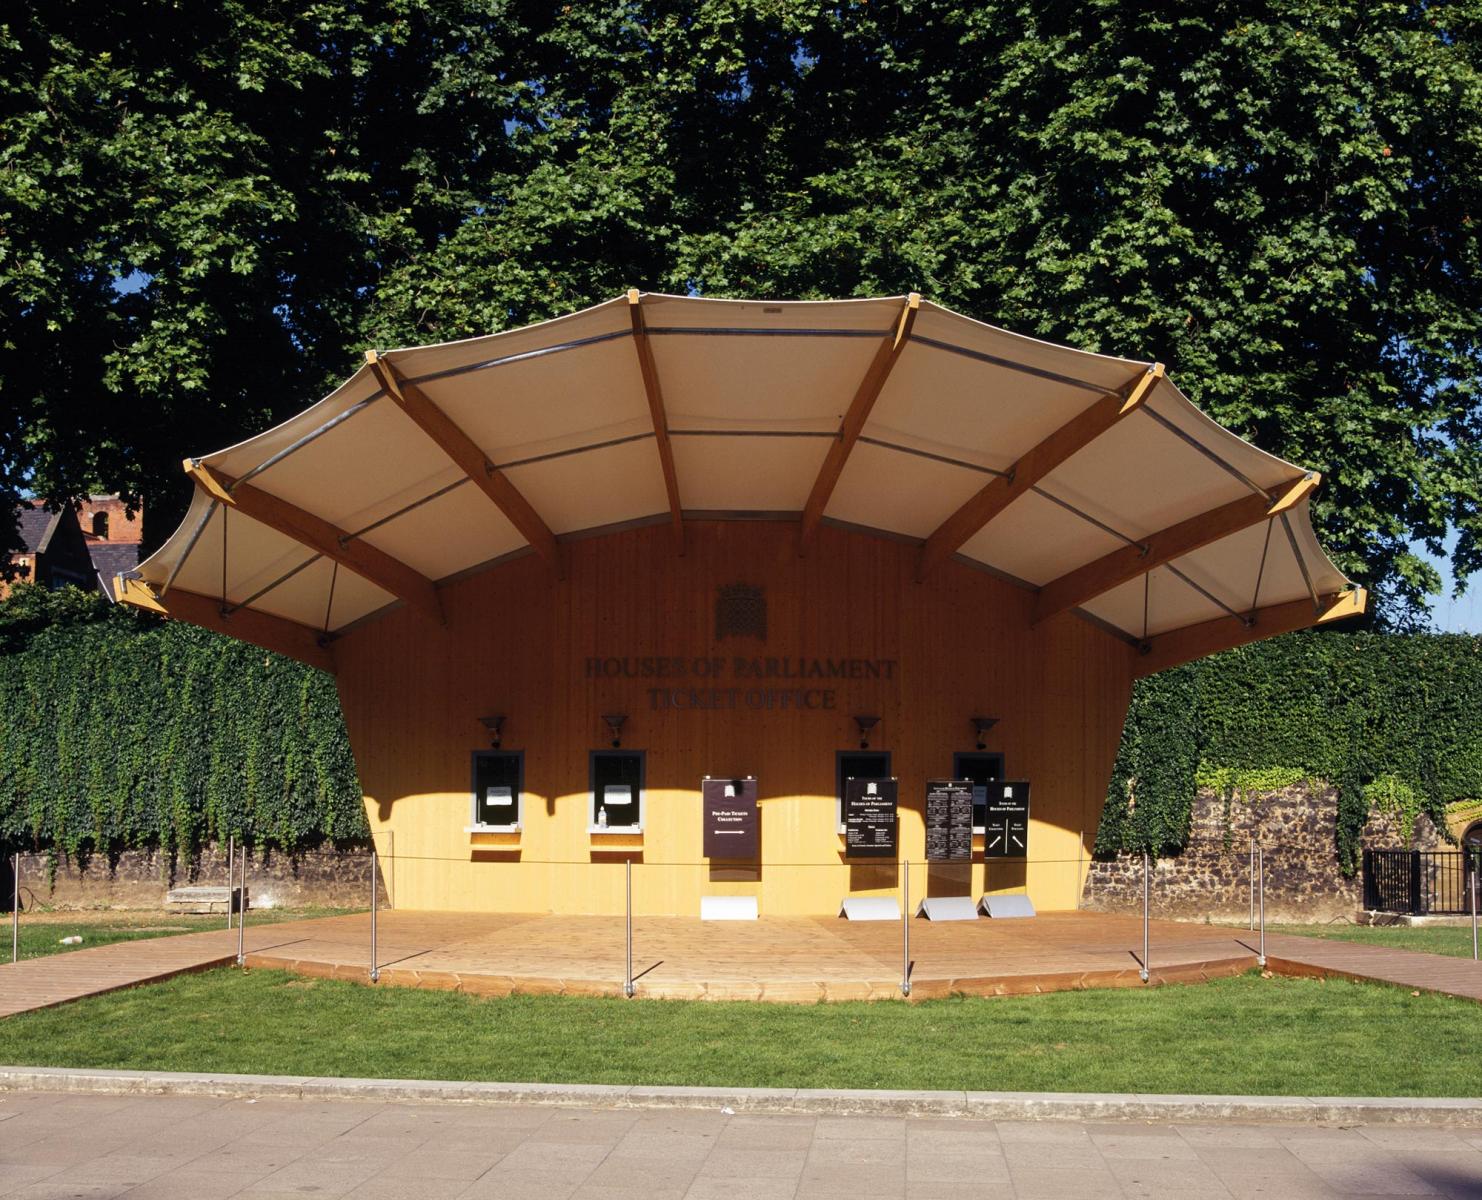 Ticket Pavilion for Summer Opening of Houses of Parlament - Front View